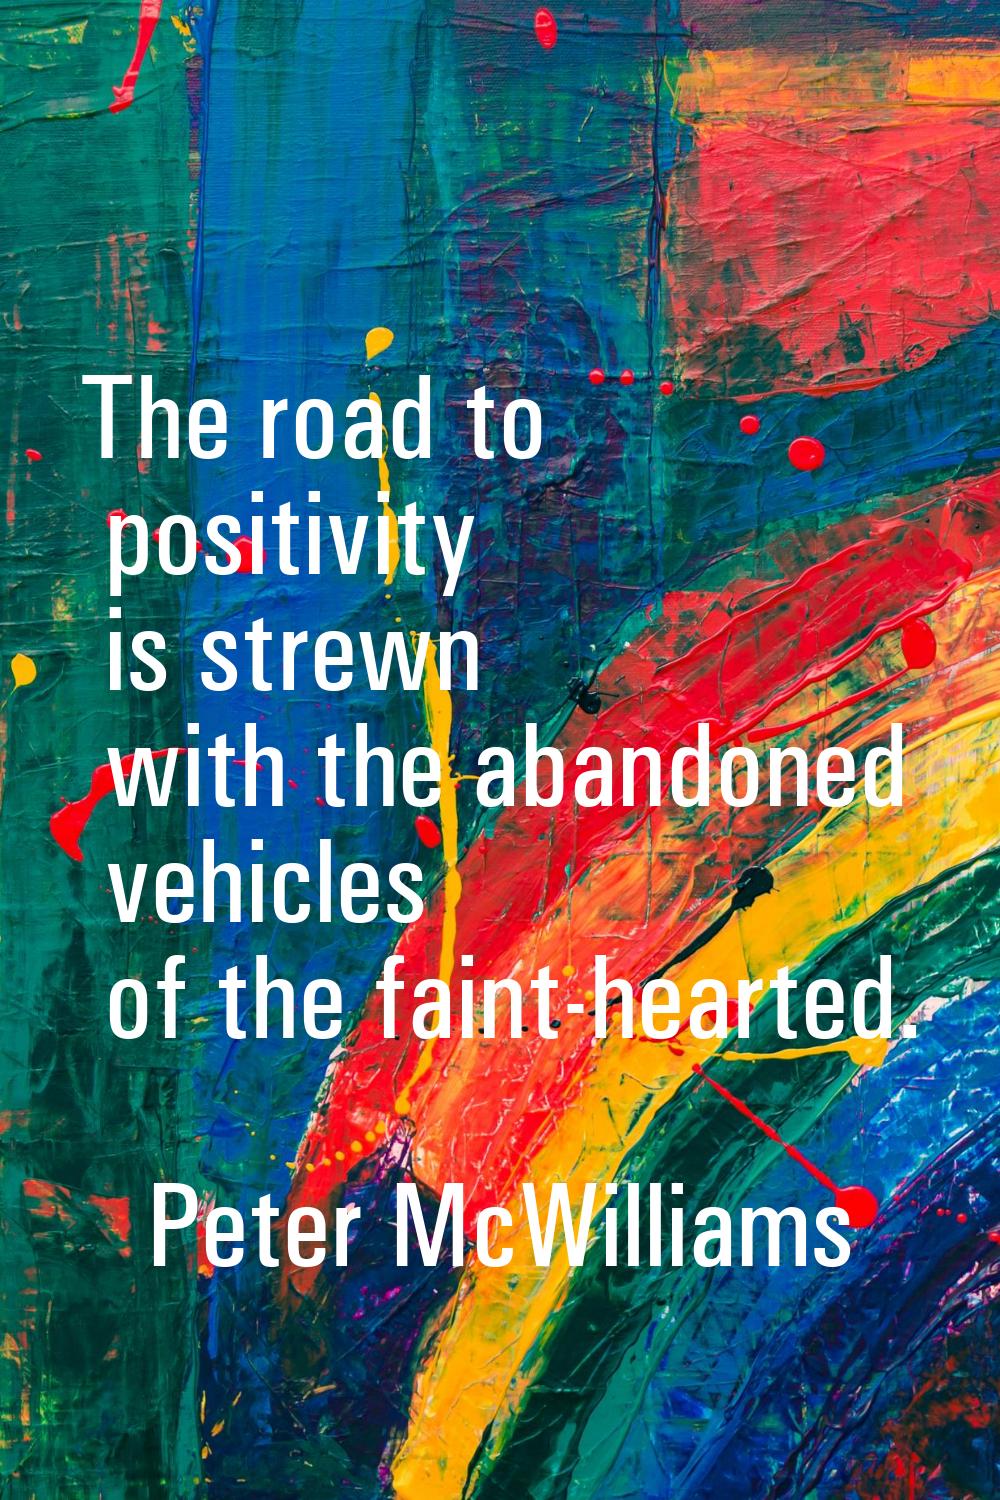 The road to positivity is strewn with the abandoned vehicles of the faint-hearted.